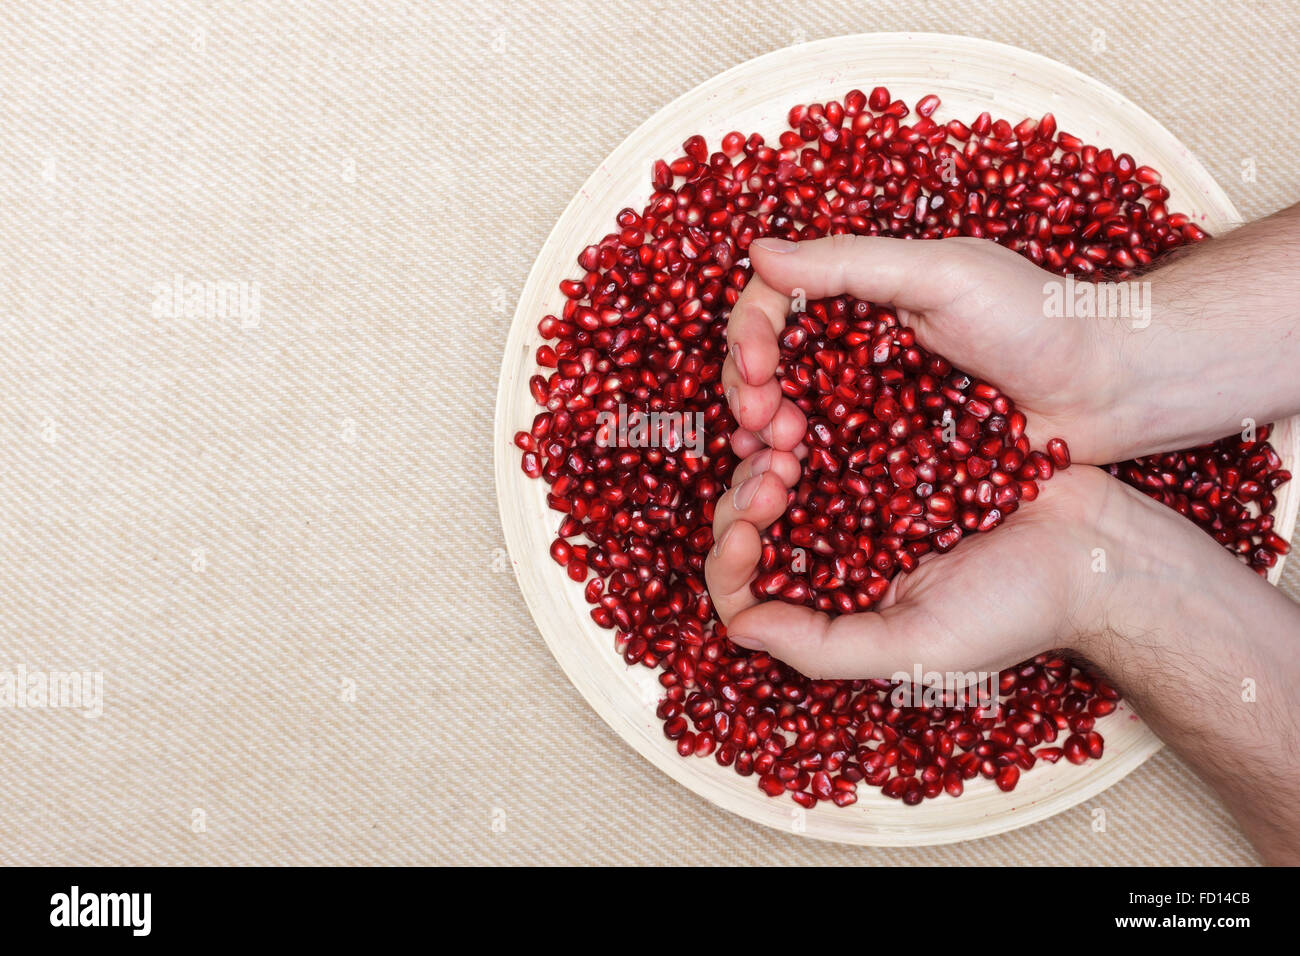 Full plate of peeled pomegranate seeds and a man holding them in shape of heart Stock Photo